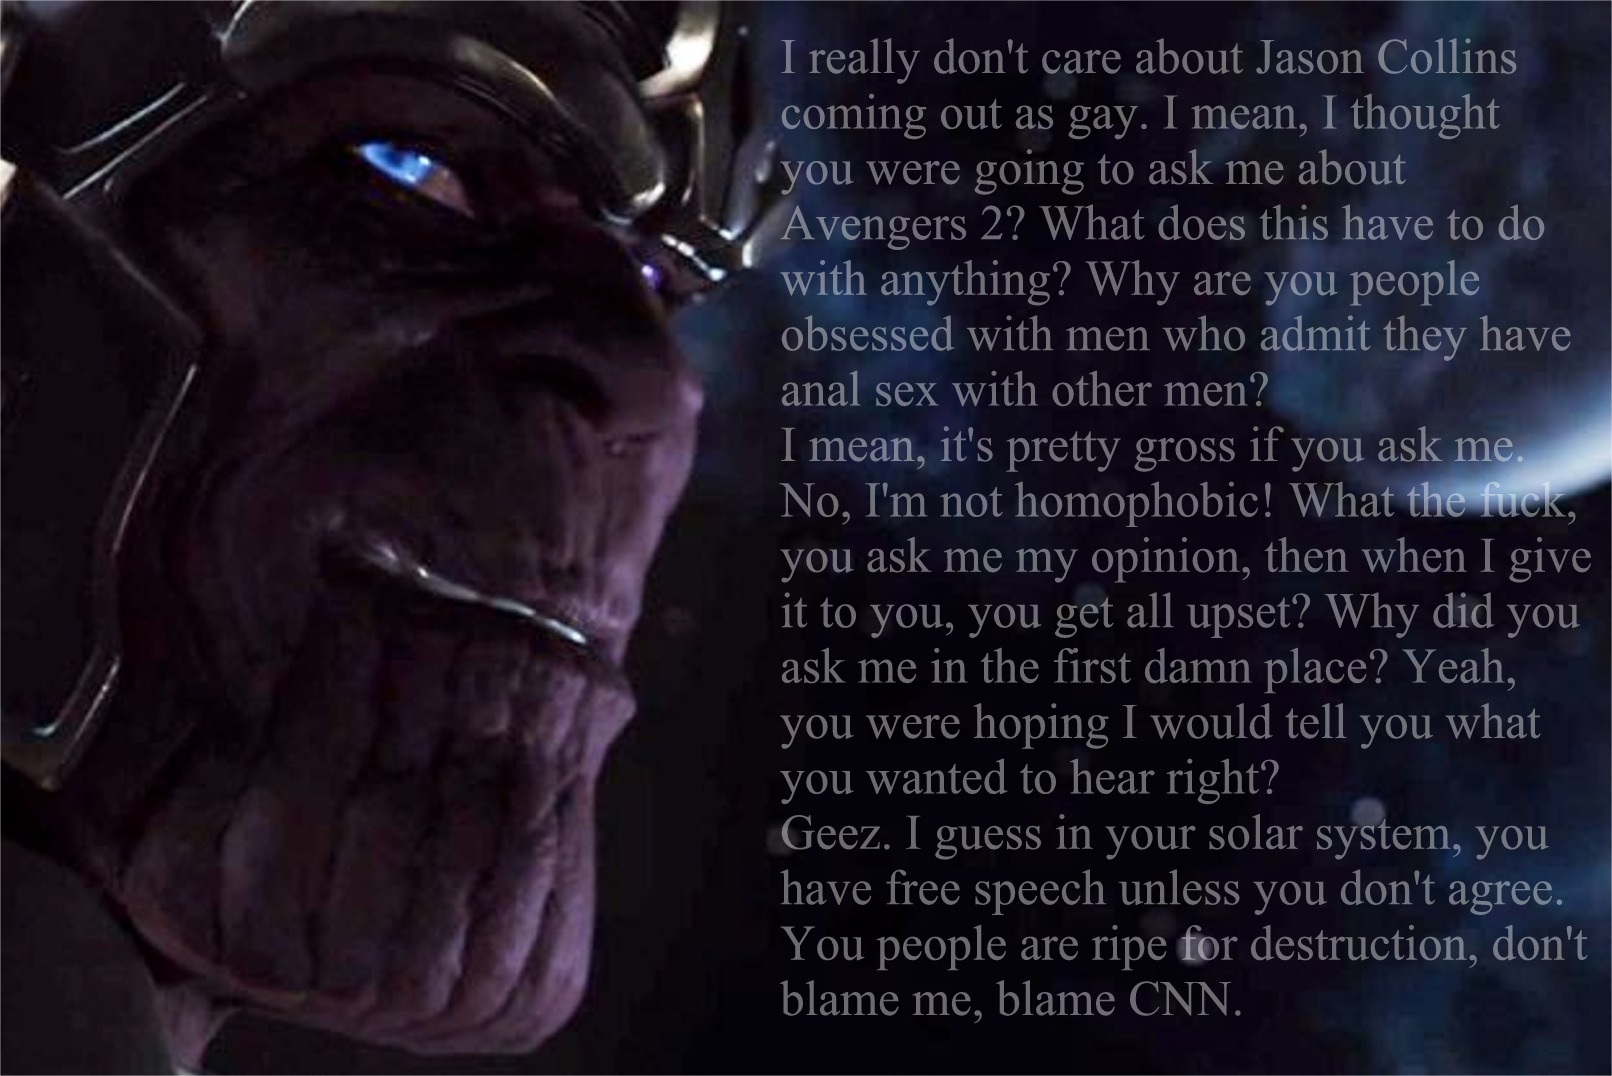 Thanos gets asked "the question" every liberal media outlet has been going crazy over. You tell 'em Thanos!